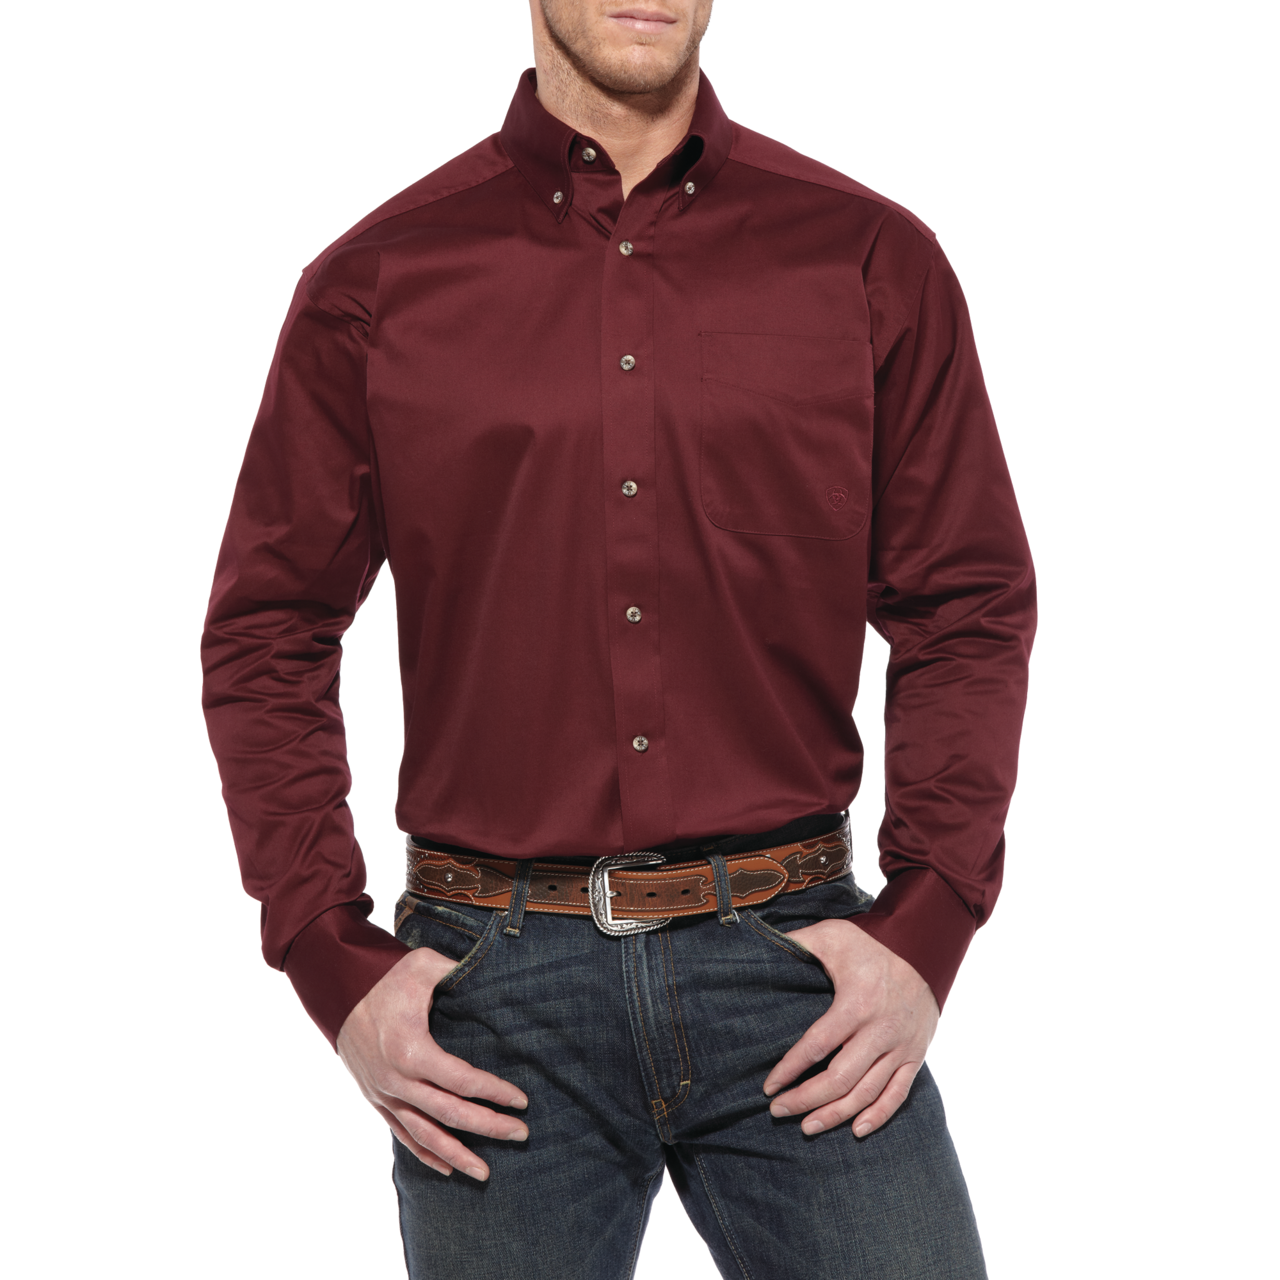 Ariat® Men's Casual Series Burgundy Fitted Button-Up Shirt 10034226